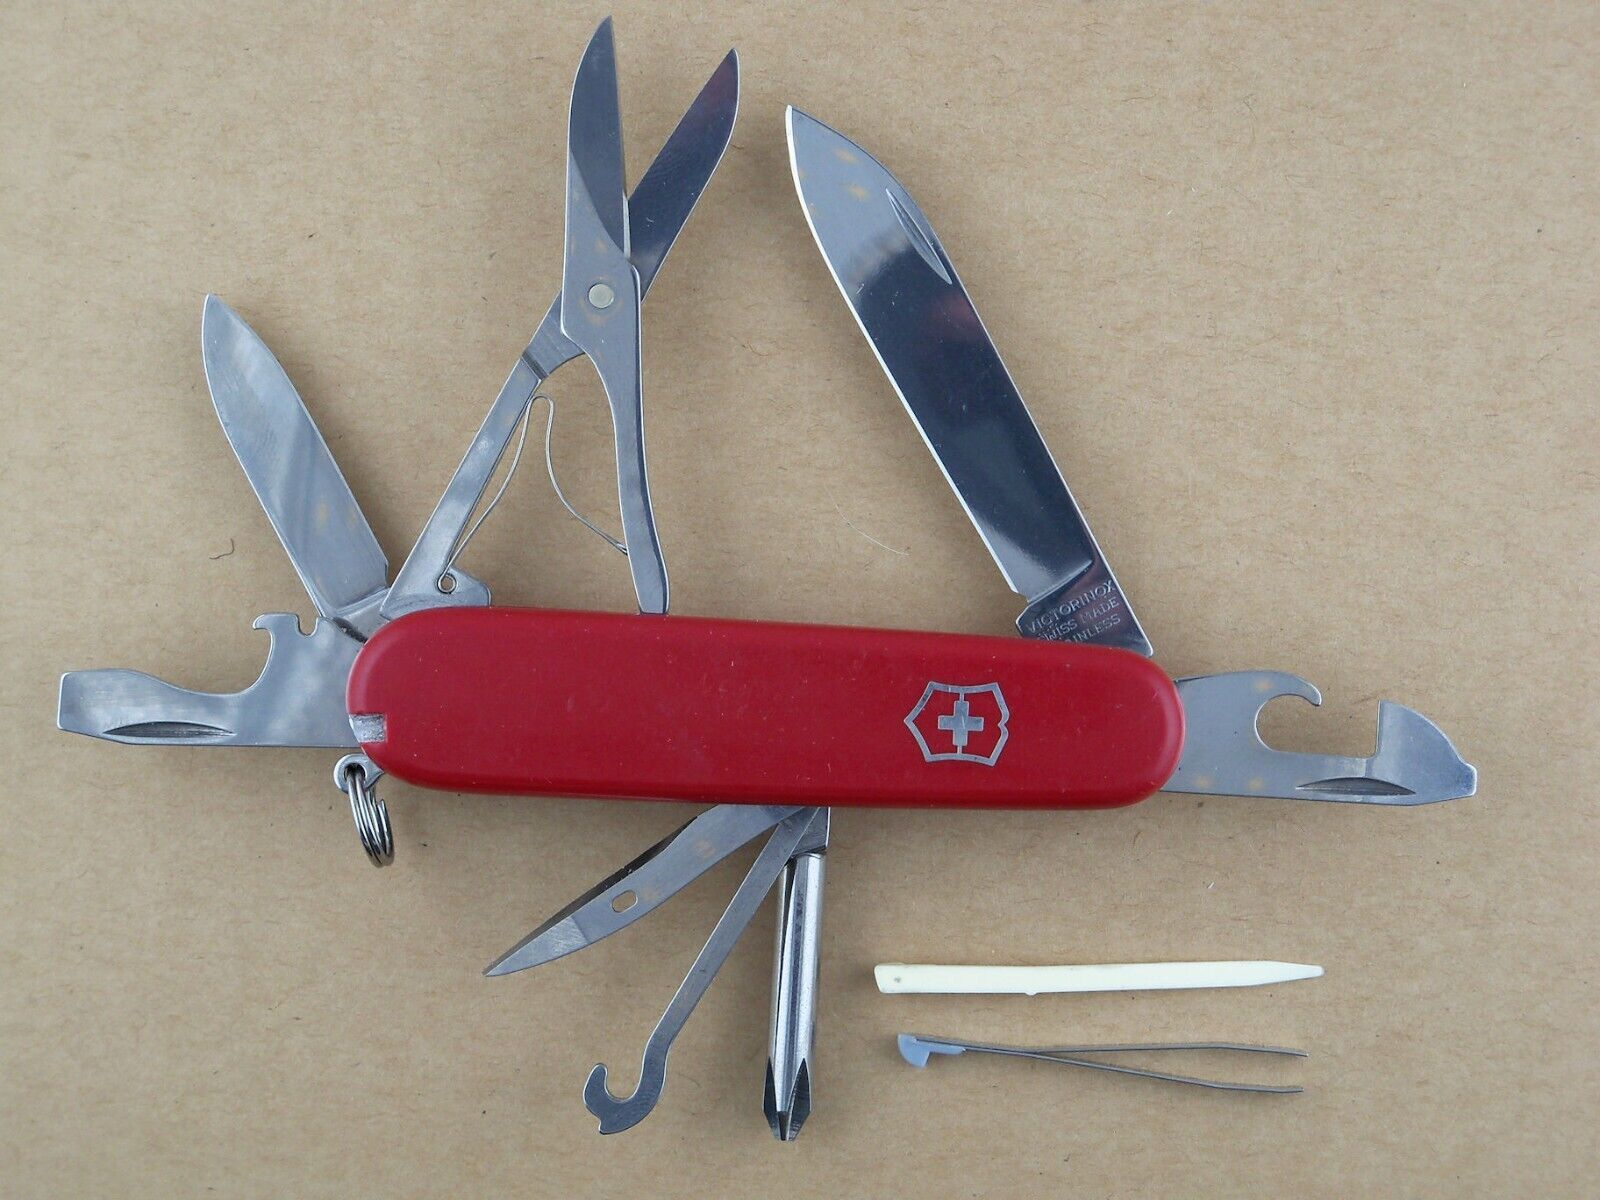 Victorinox Super Tinker Swiss Army Pocket Knife - Red - Phillips - Very Good